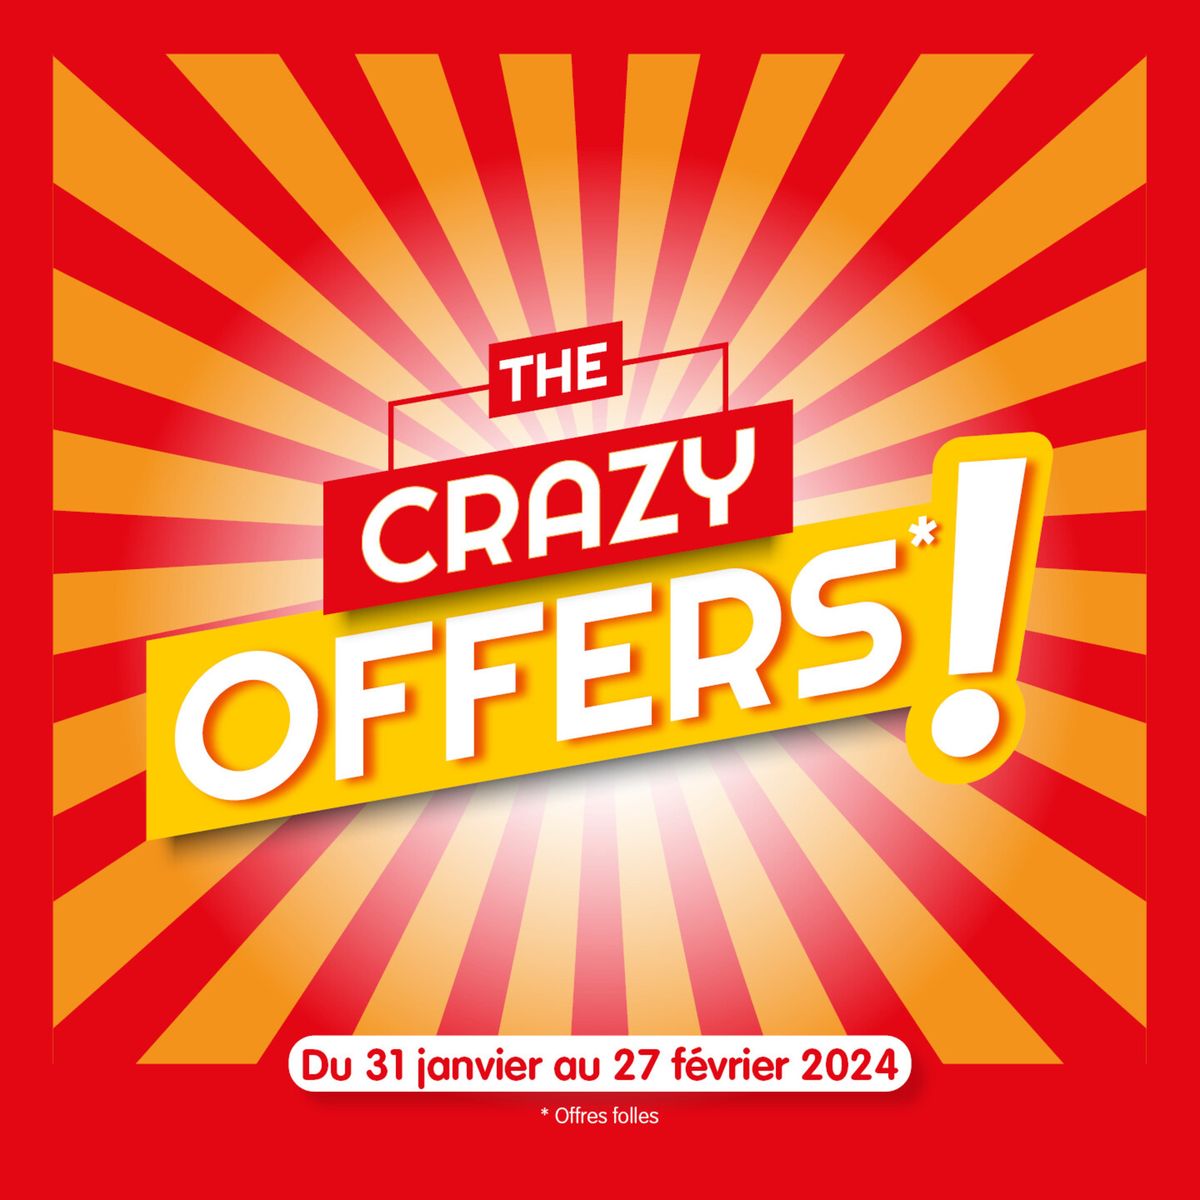 Catalogue The crazy offers !, page 00001